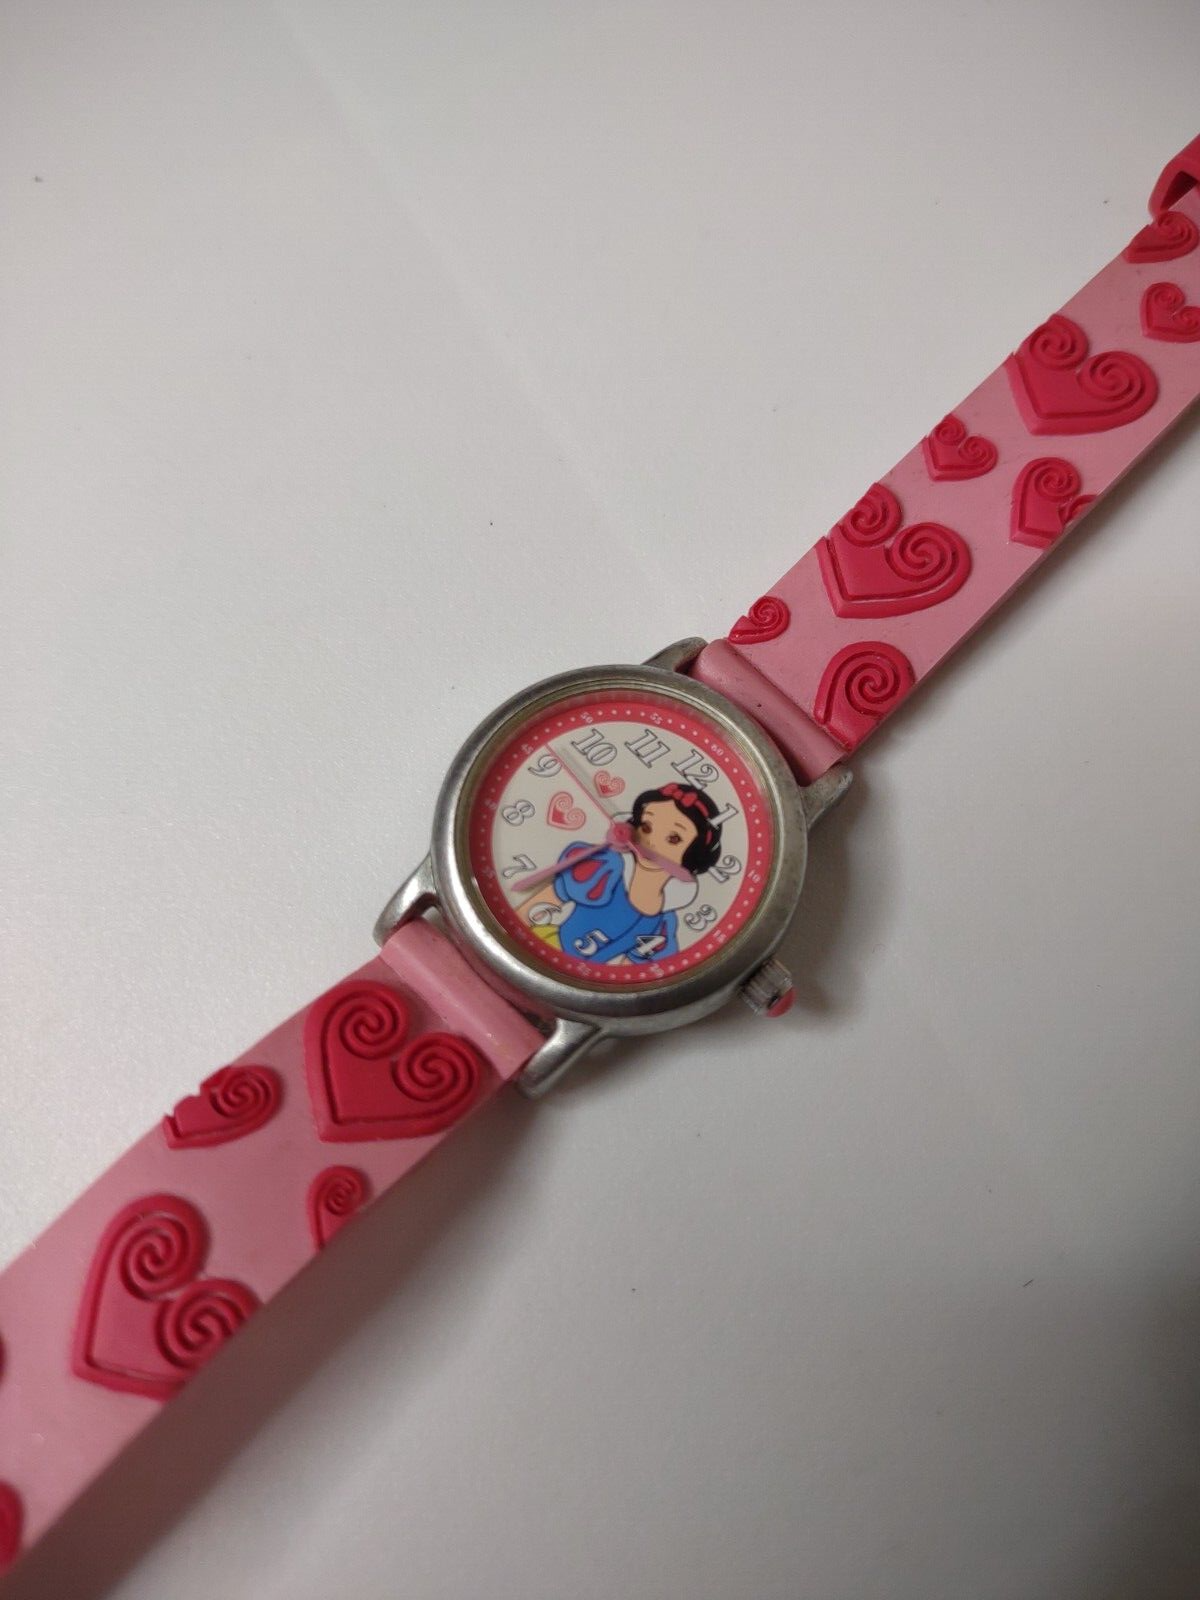 Pink Snow White Disney Watch With Hearts - $75.00